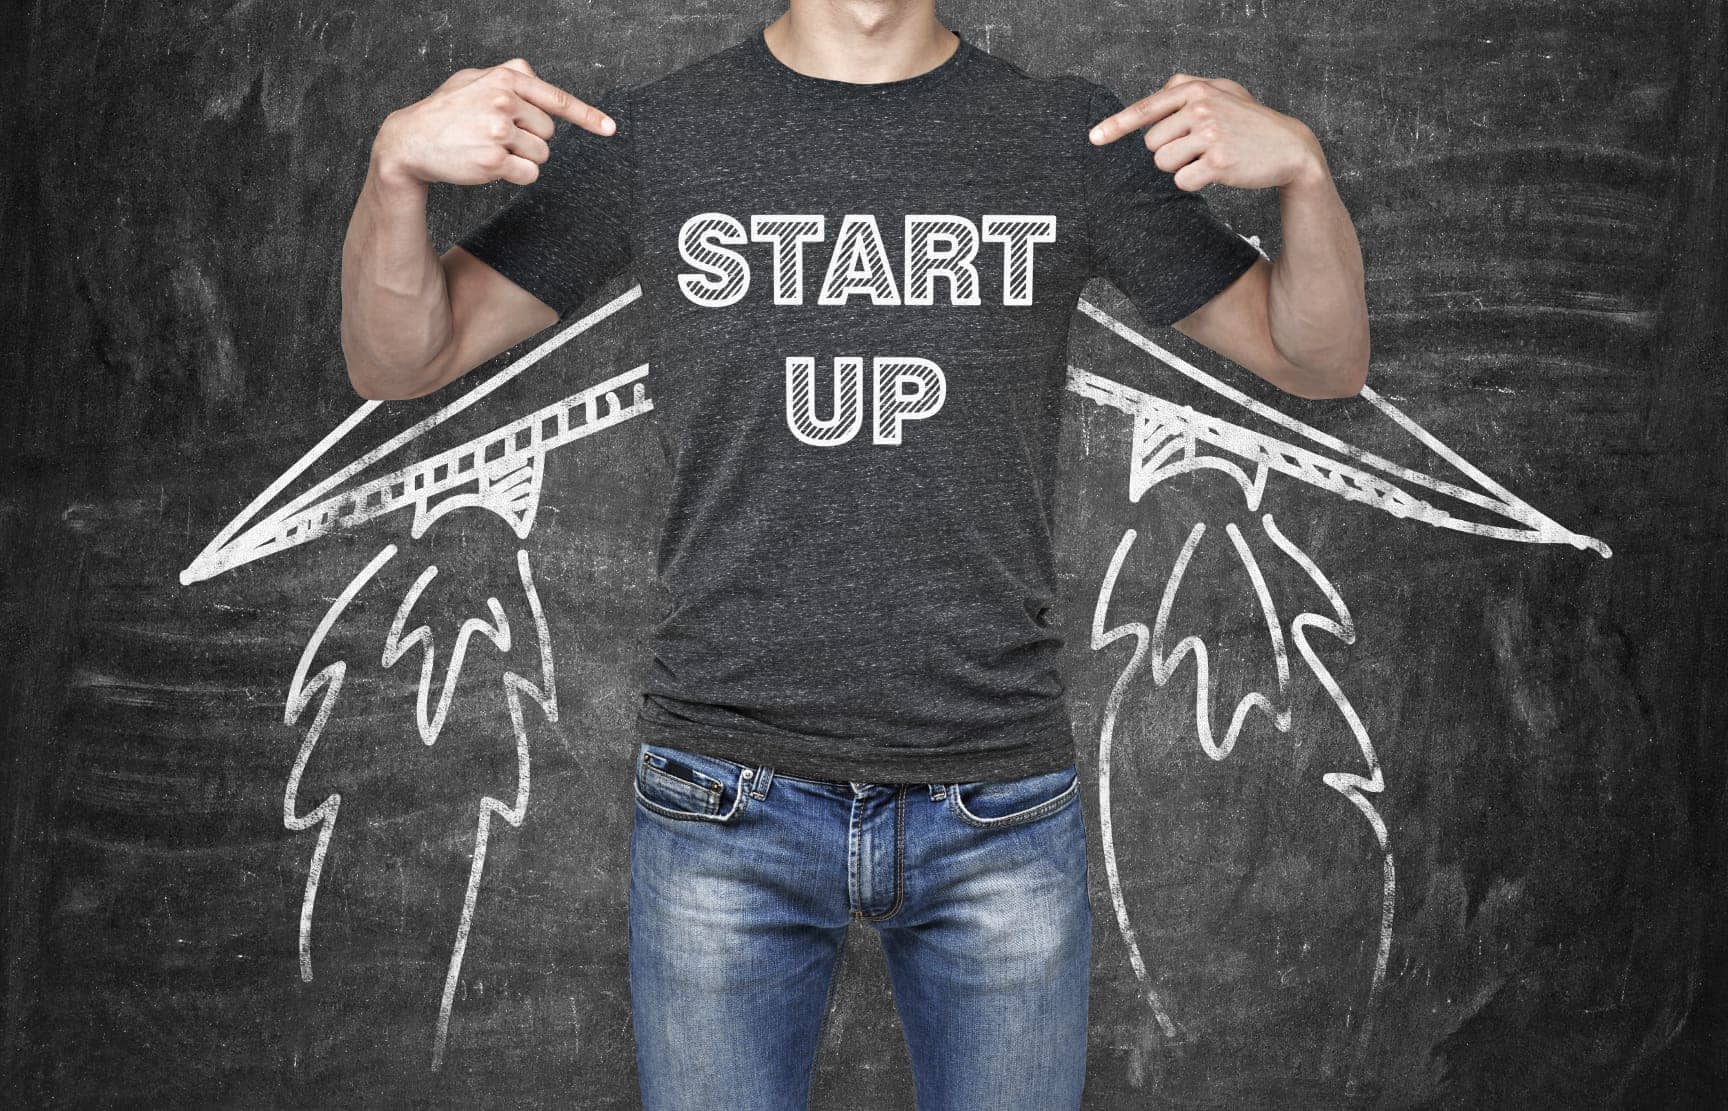 Top tips for naming your start up business